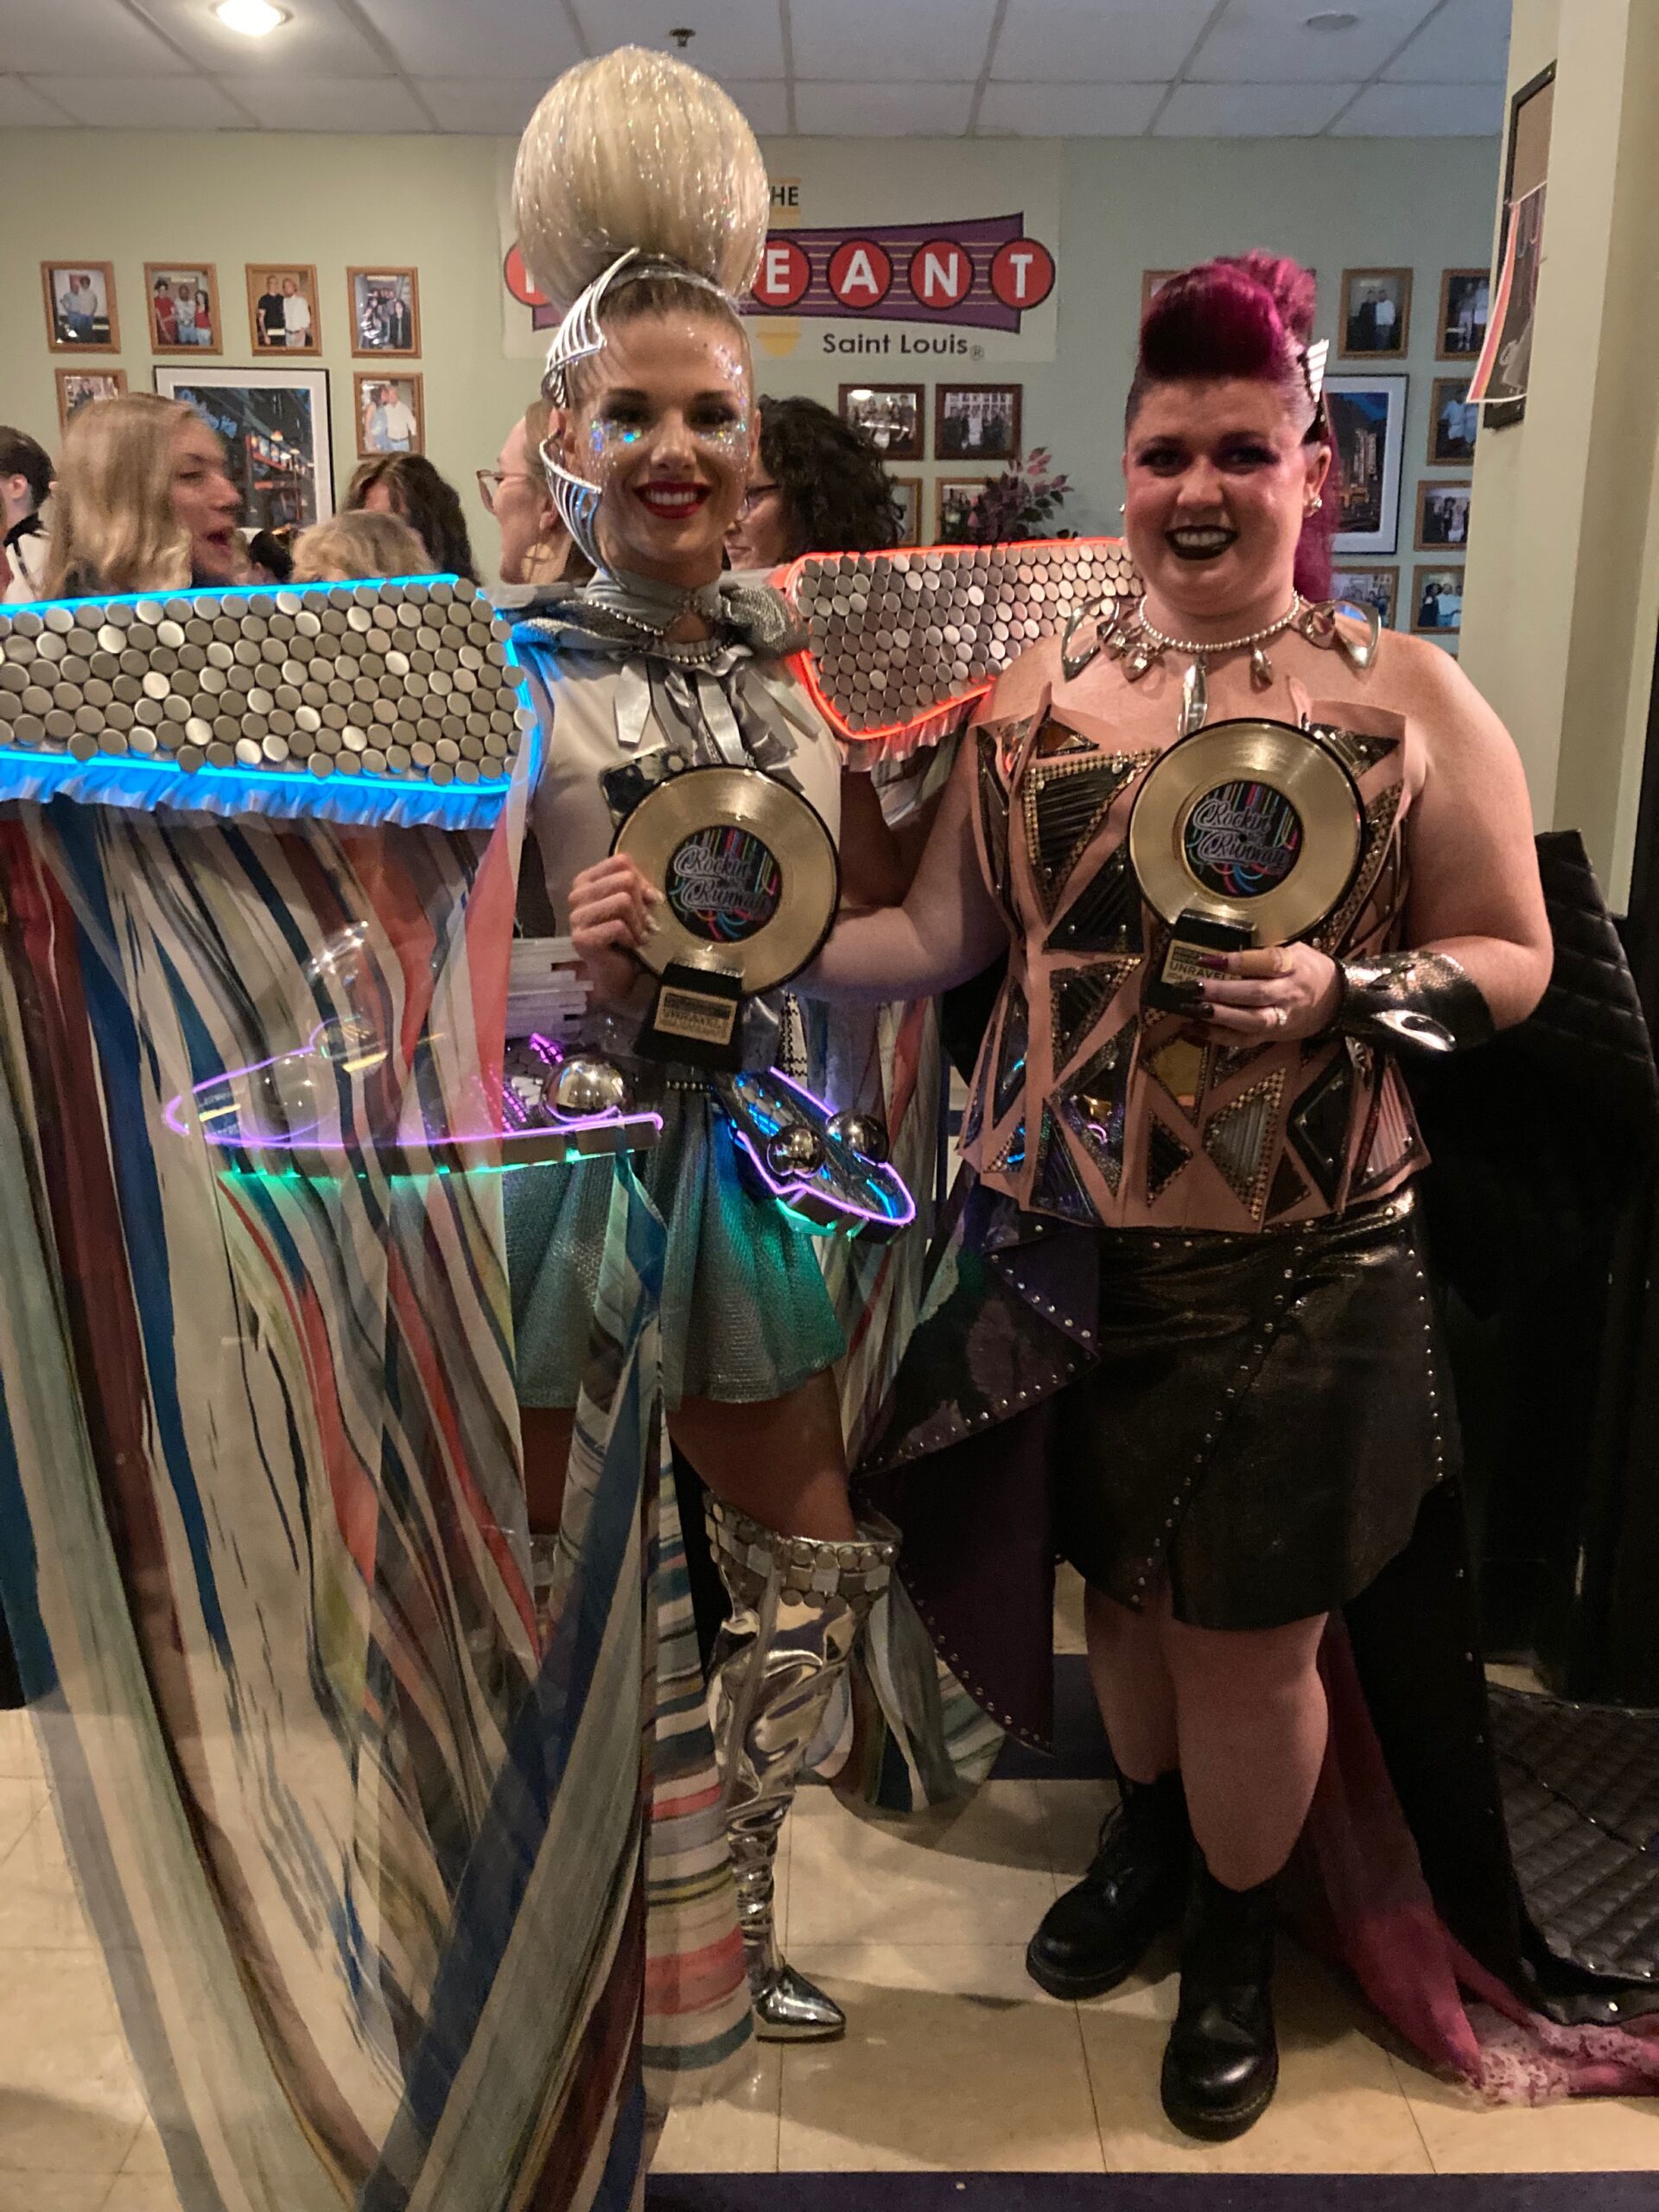 Katie Hepting and Sarah Bundy holding up their awards for their teams dressed in their Unravel outfits